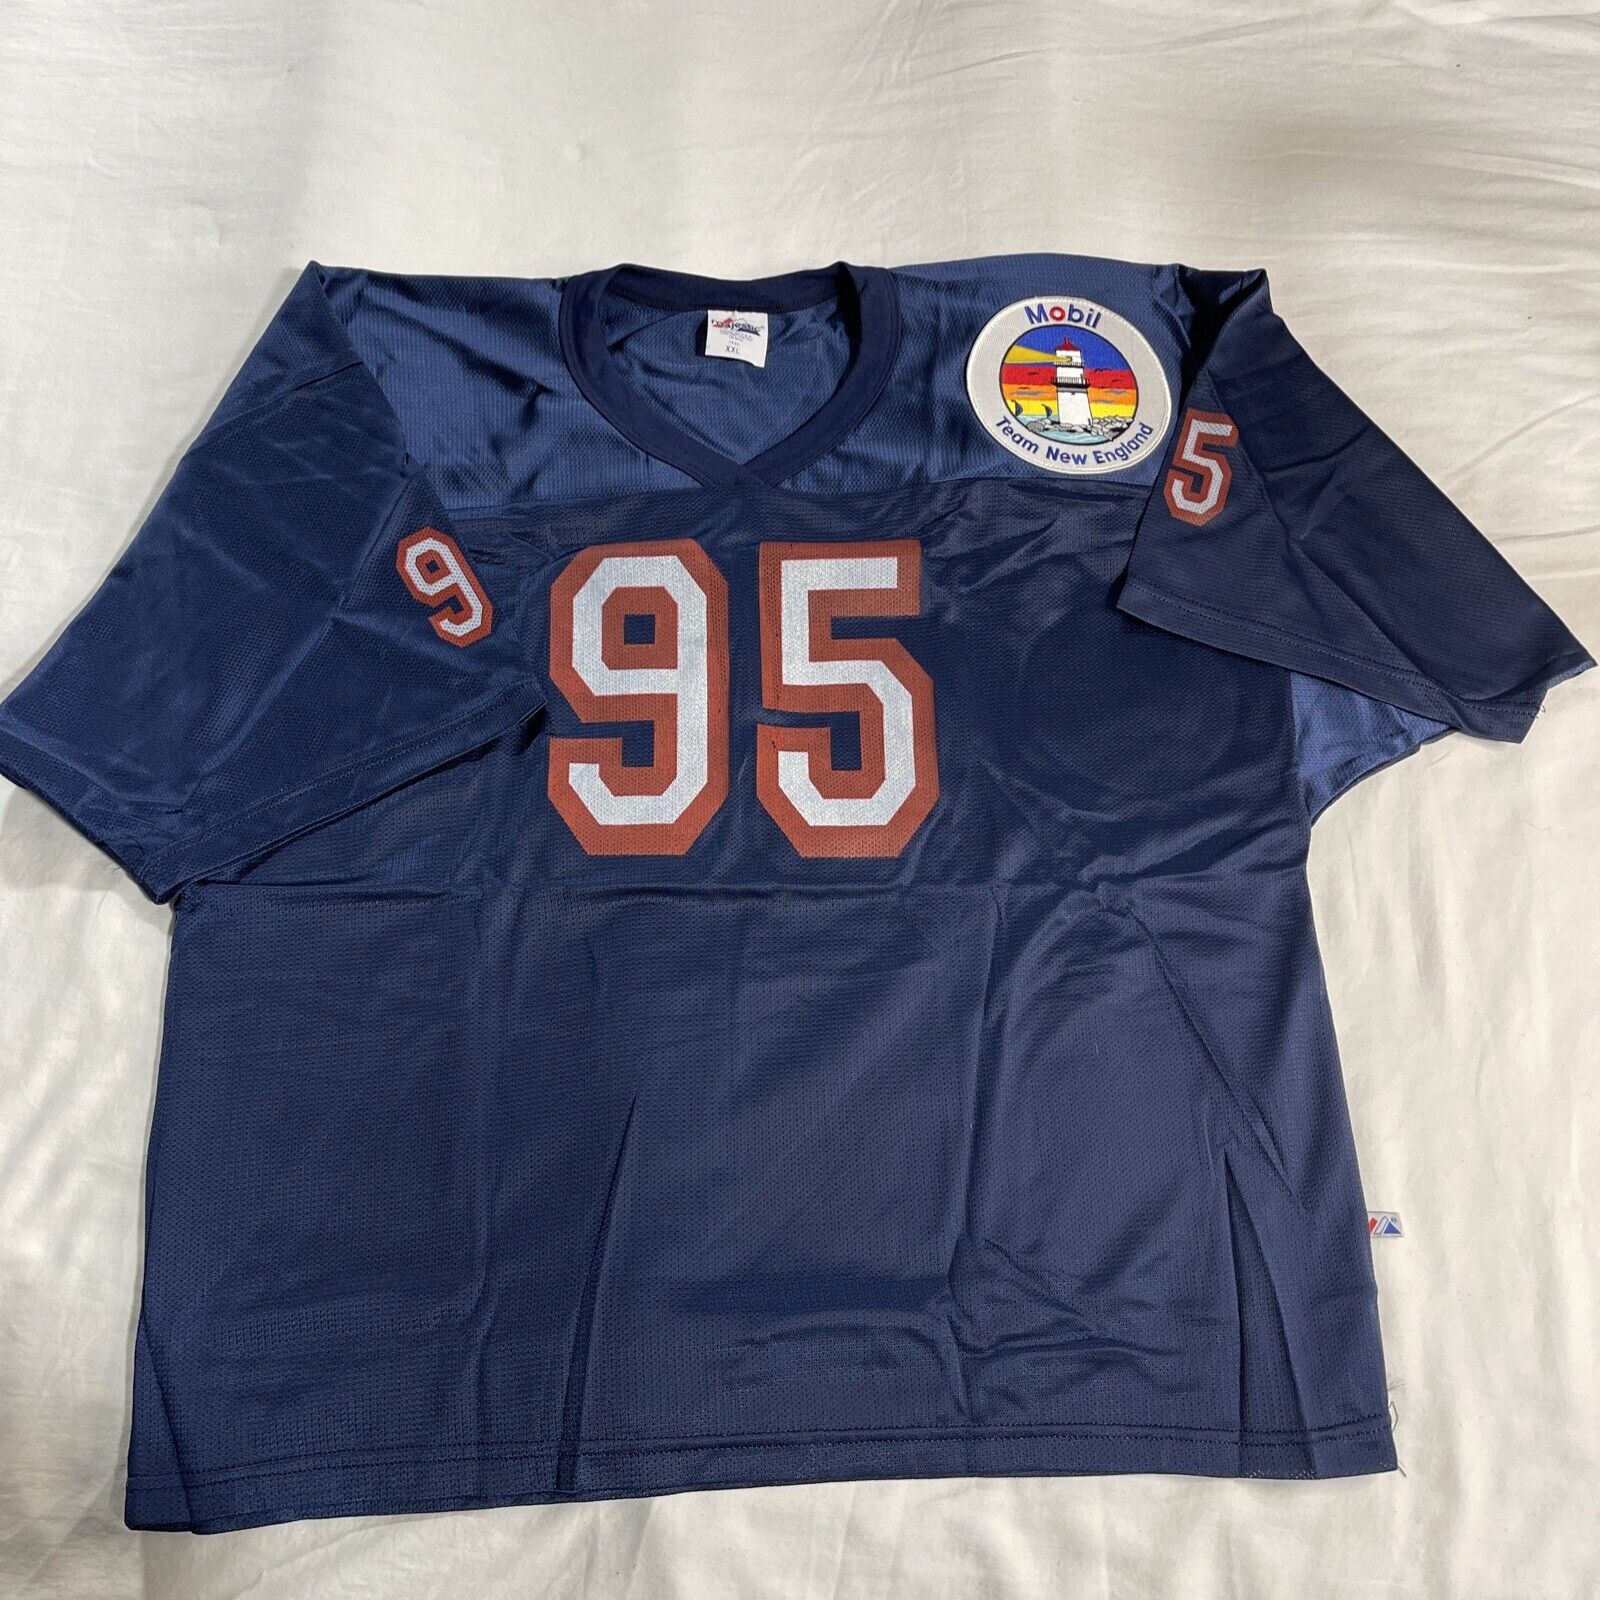 Rare Vintage Majestic Sports Jersey with \